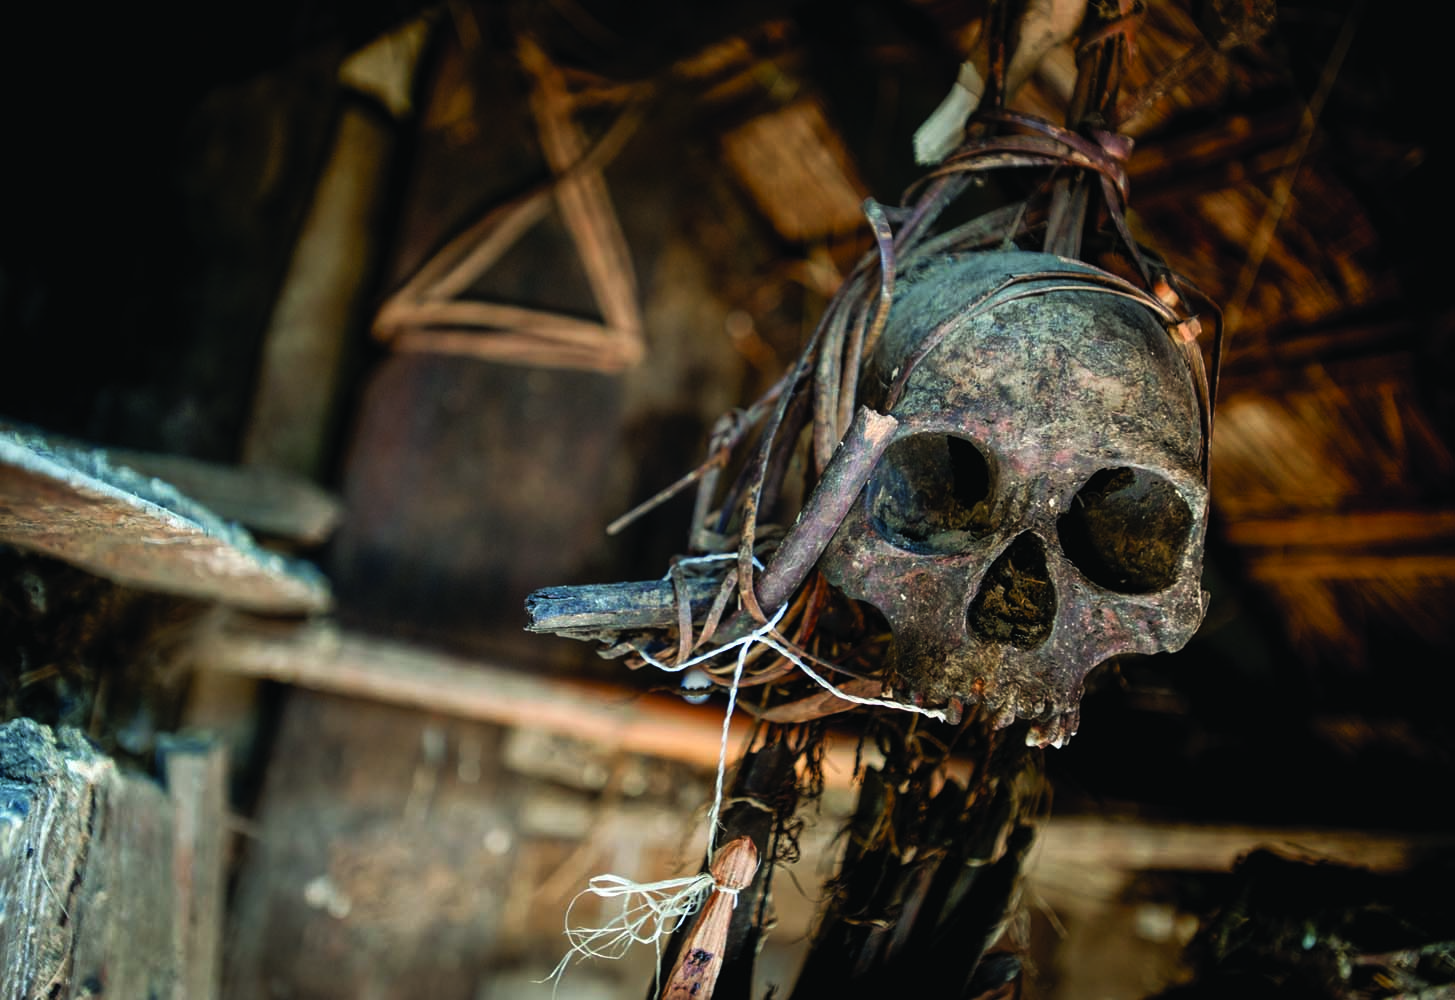 Legend has it that the skull hanging in the hut behind the chief of Pansar’s house once belonged to a Koki warrior. Despite its unimpressive setting, the chief said that the skull still has the power to cause trouble for anyone who disrespects it. Photo by Elliott D. Woods.